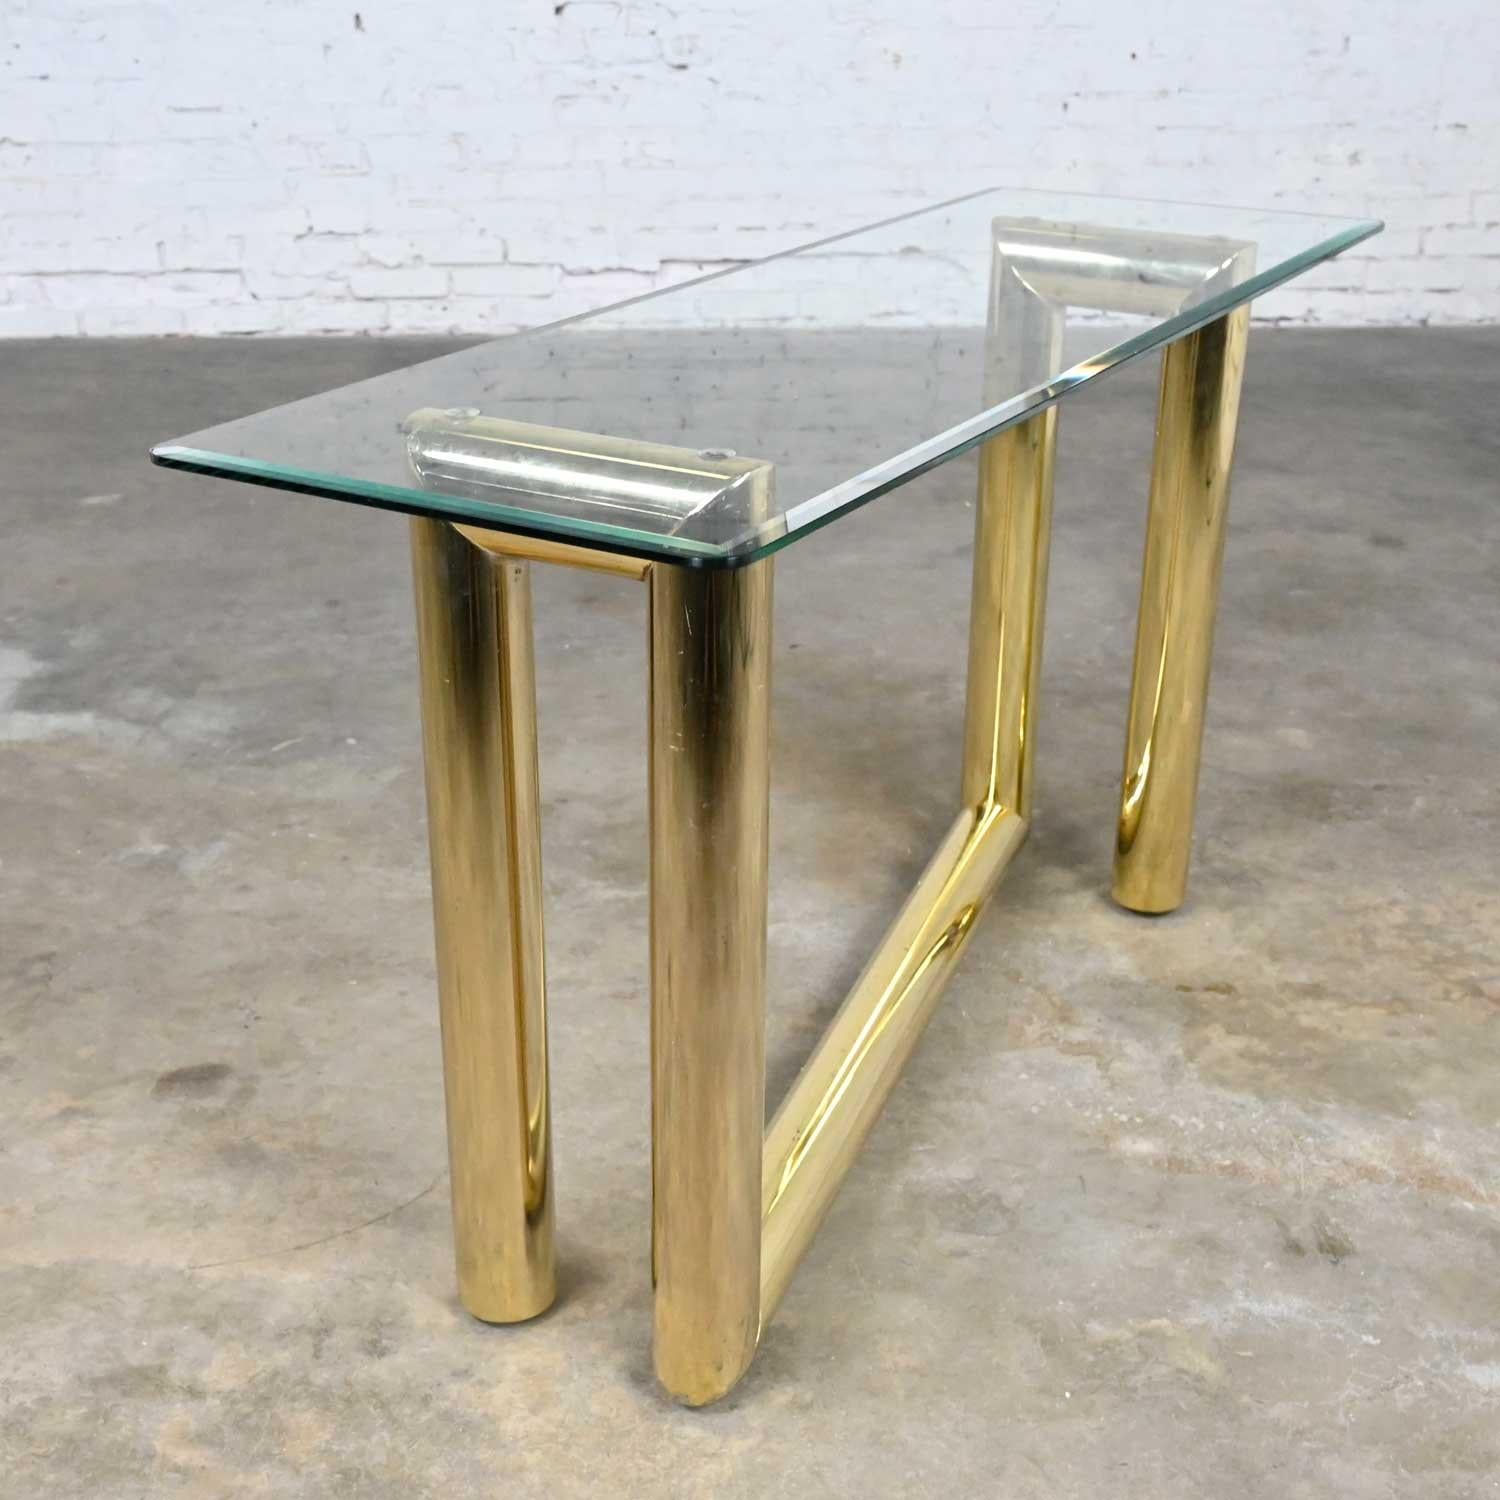 Vintage Modern Brass Plated Console Sofa Table Glass Top Style Karl Springer 1